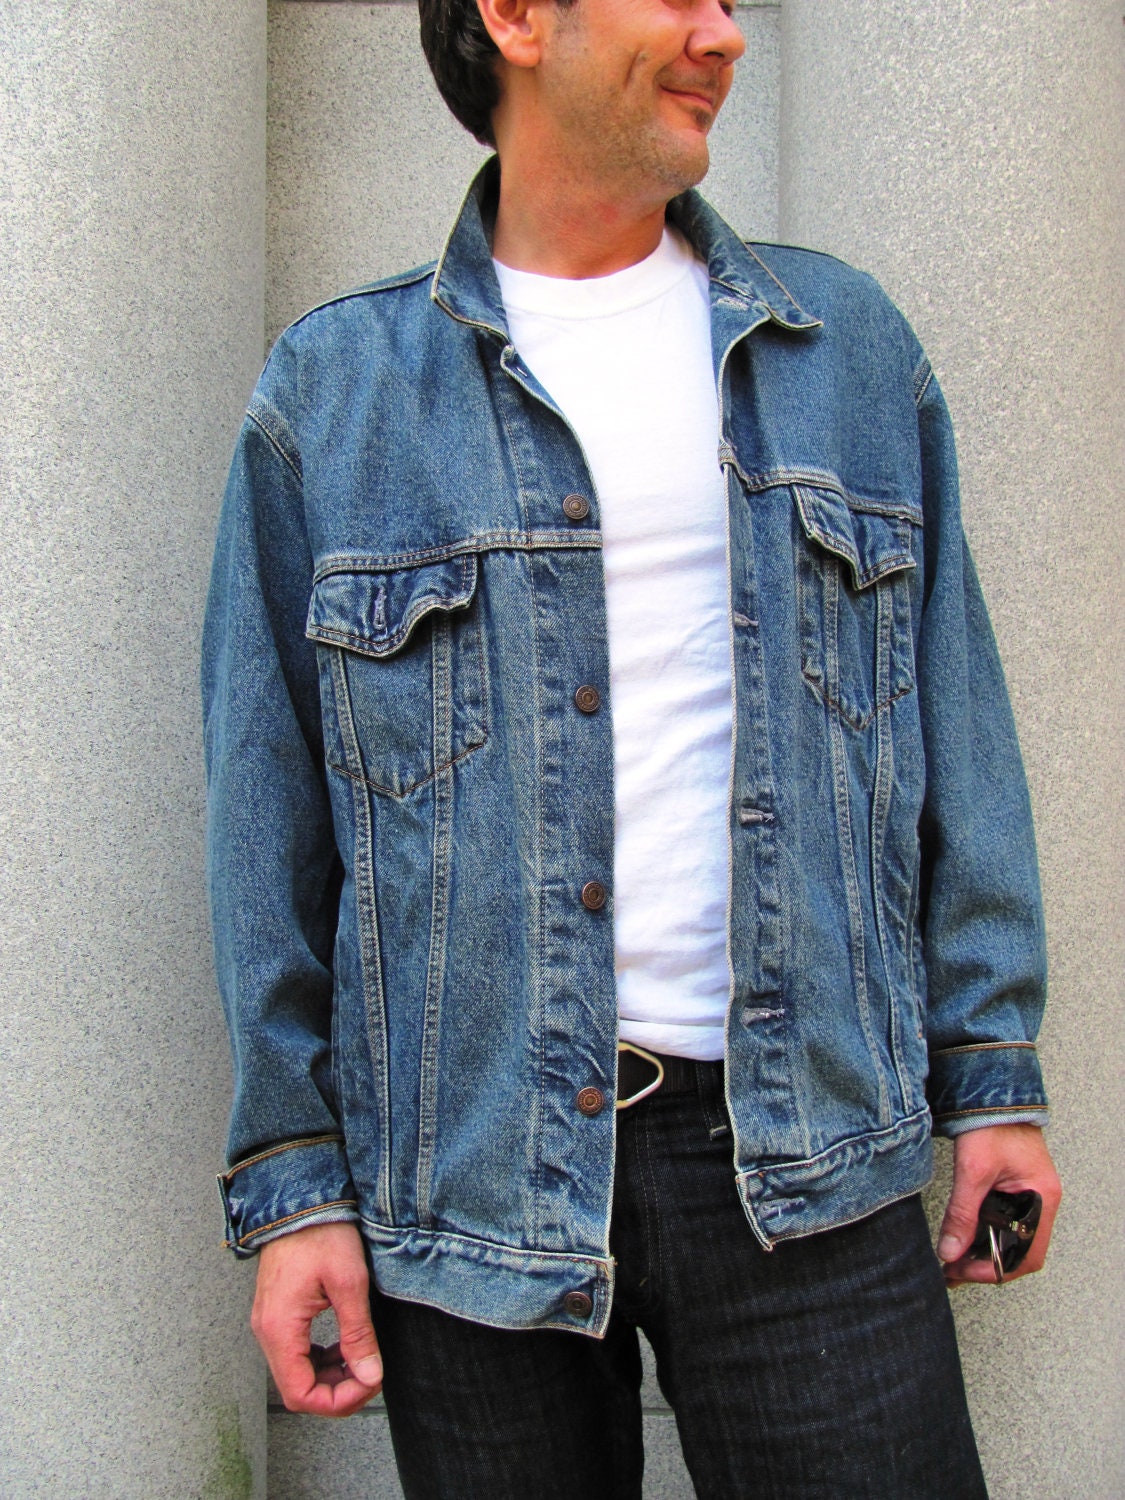 Levi Man 80s Denim Jacket Large by thebadtwin on Etsy